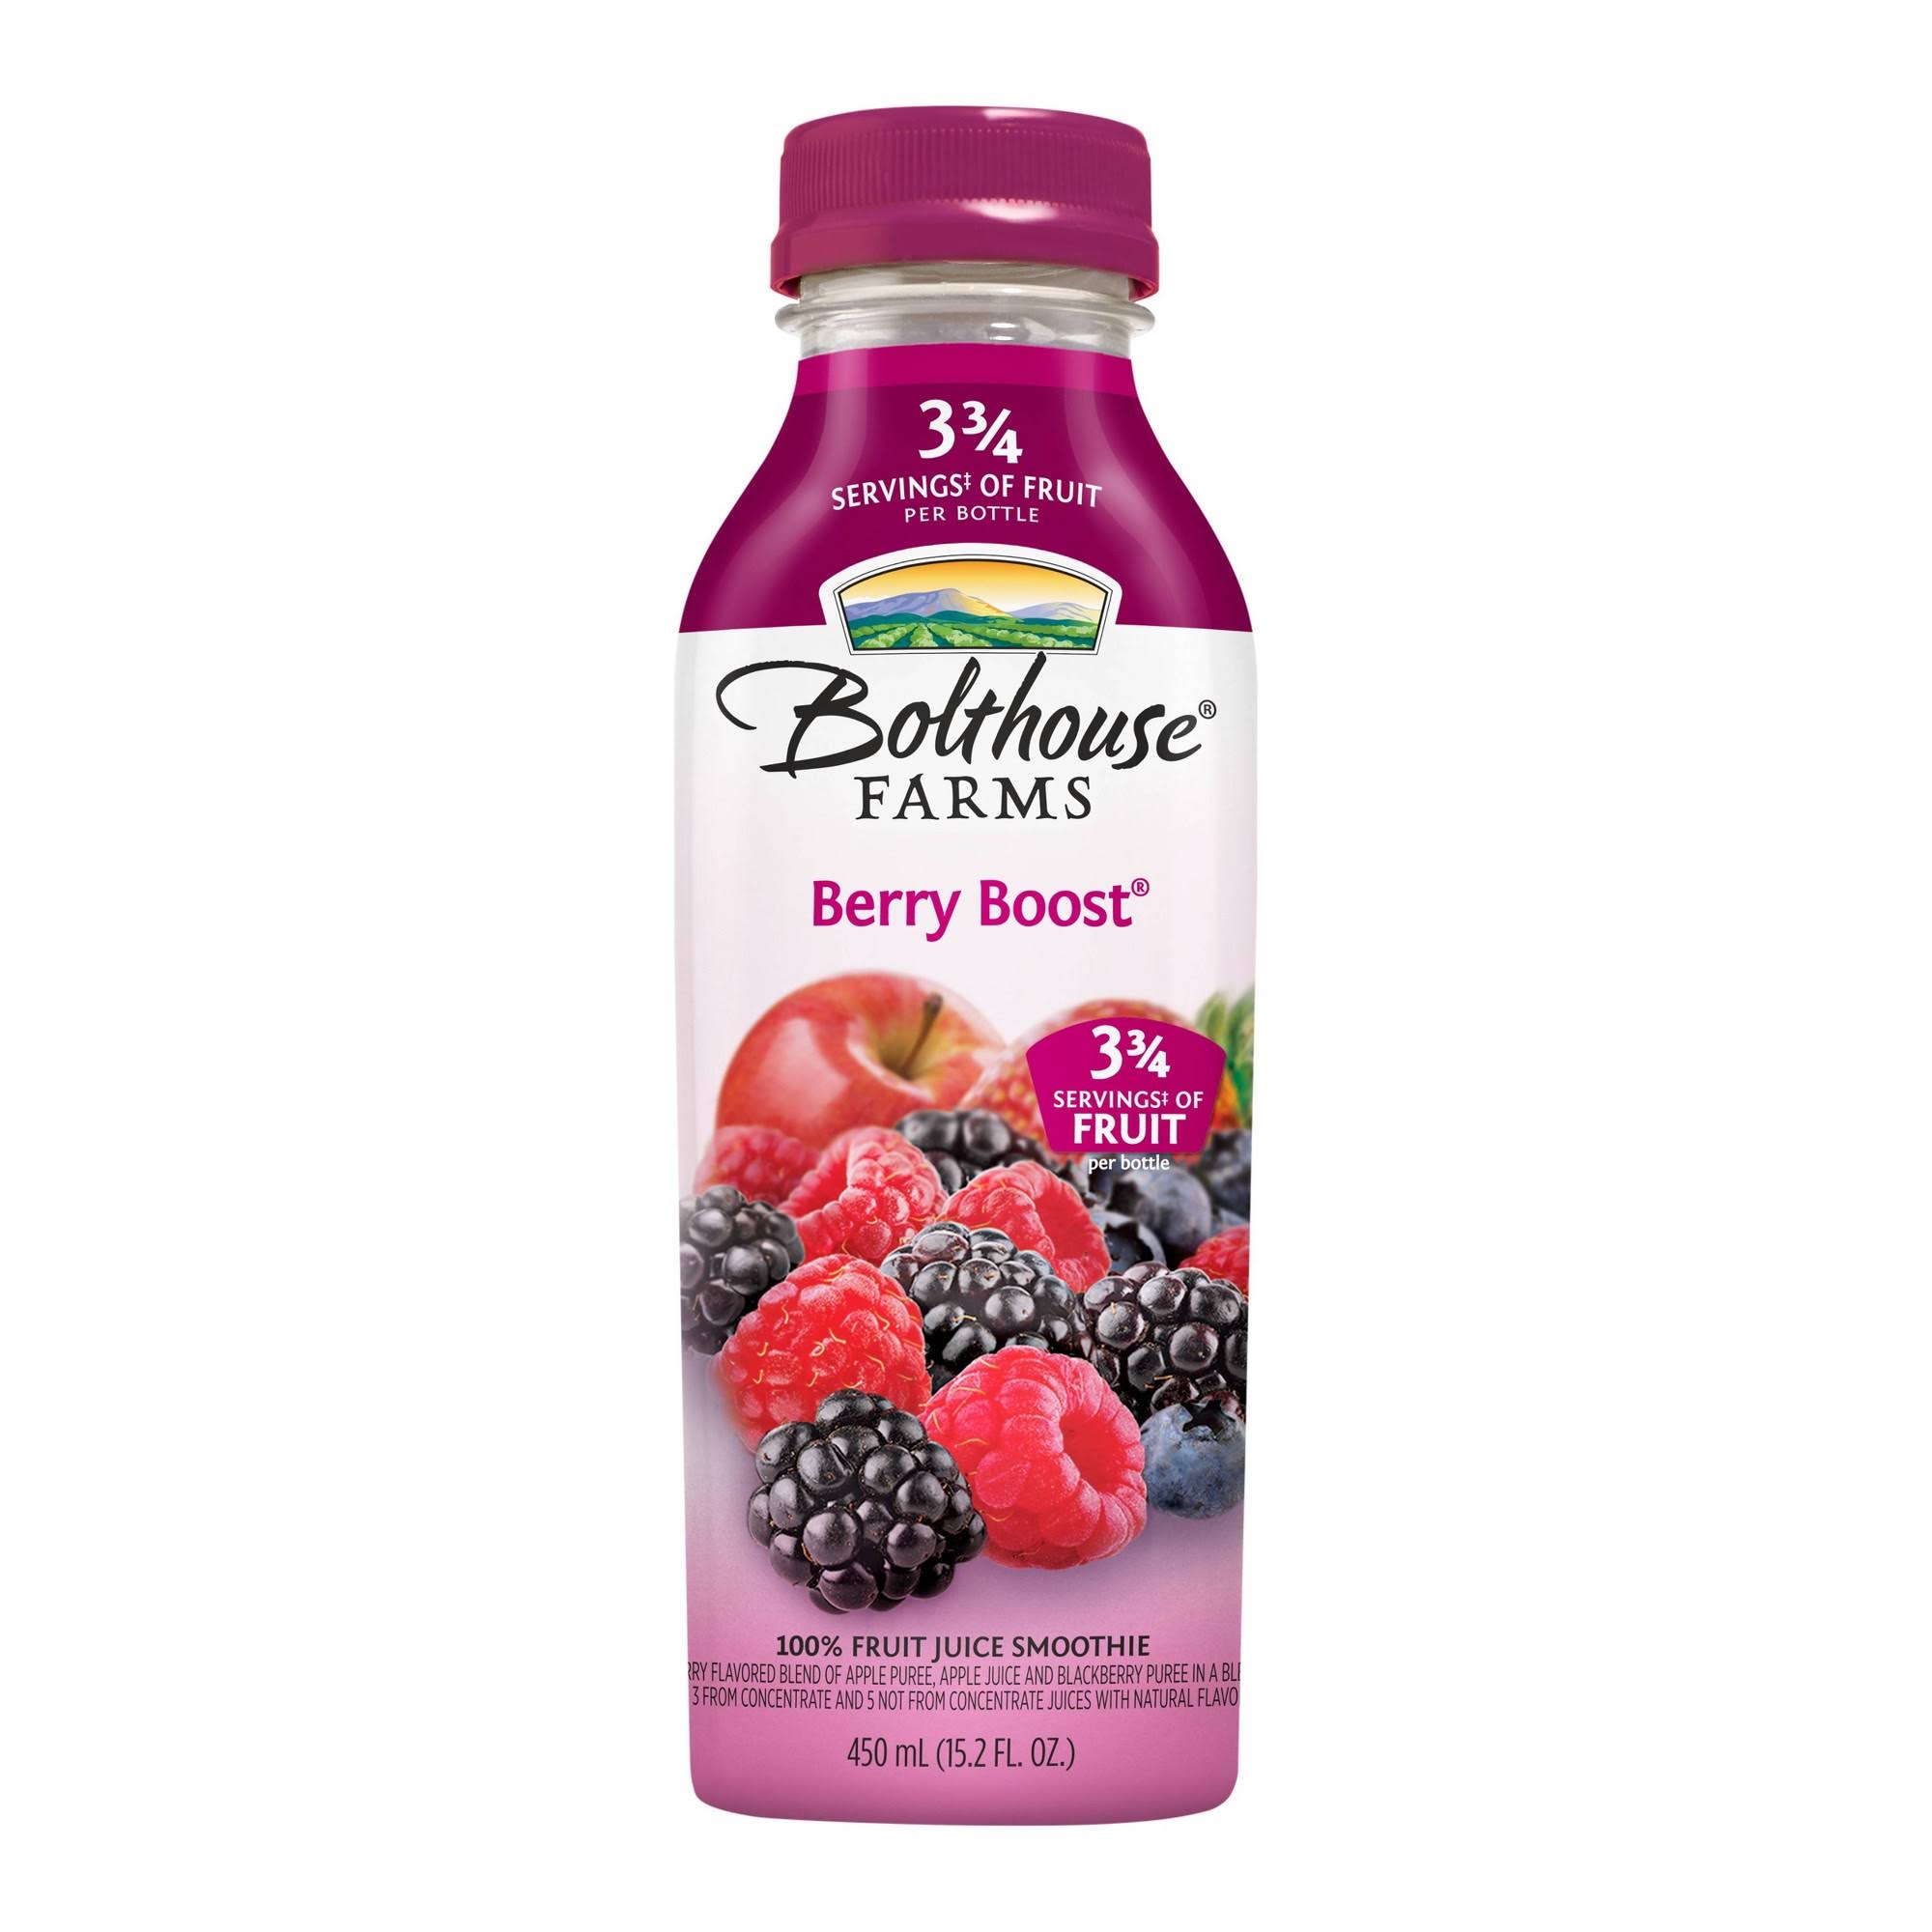 Bolthouse Farms Fruit Juice Smoothie - Berry Boost, 15.2oz